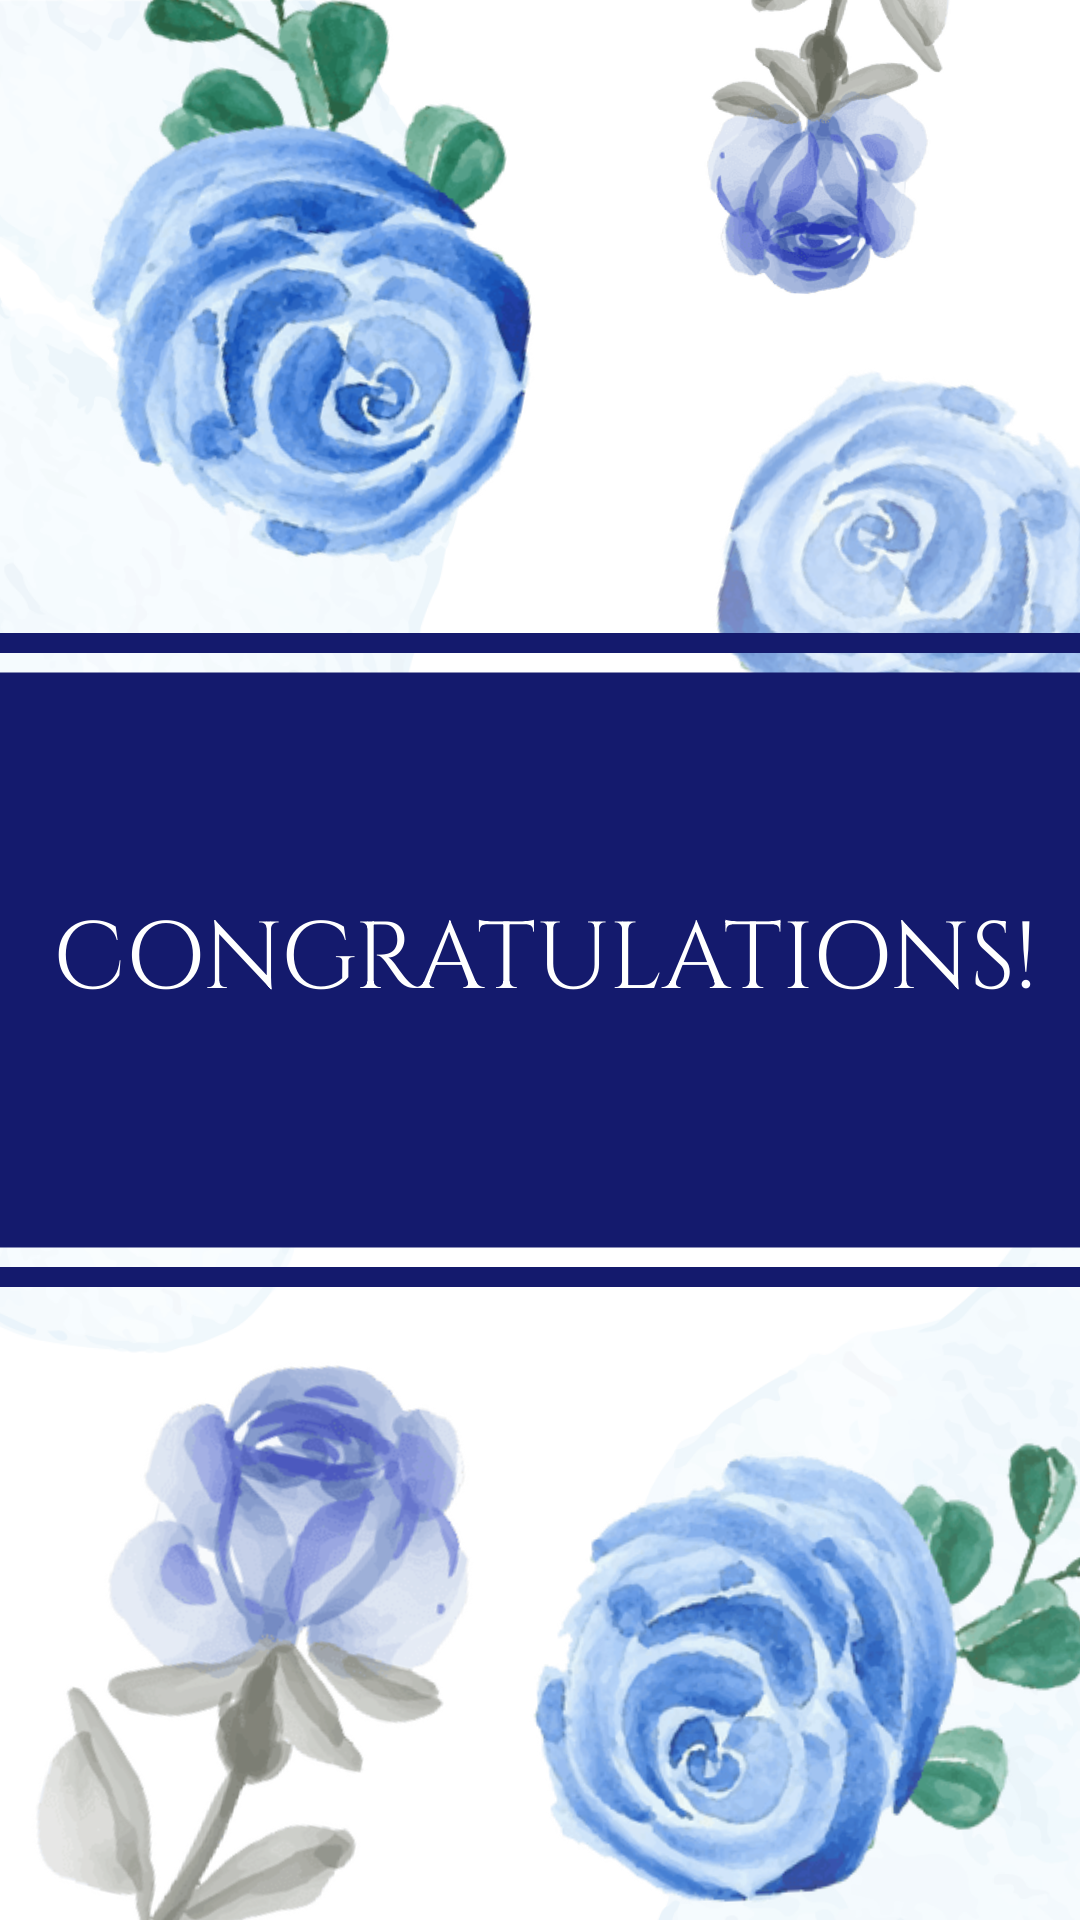 Congratulations Greeting Banner Template